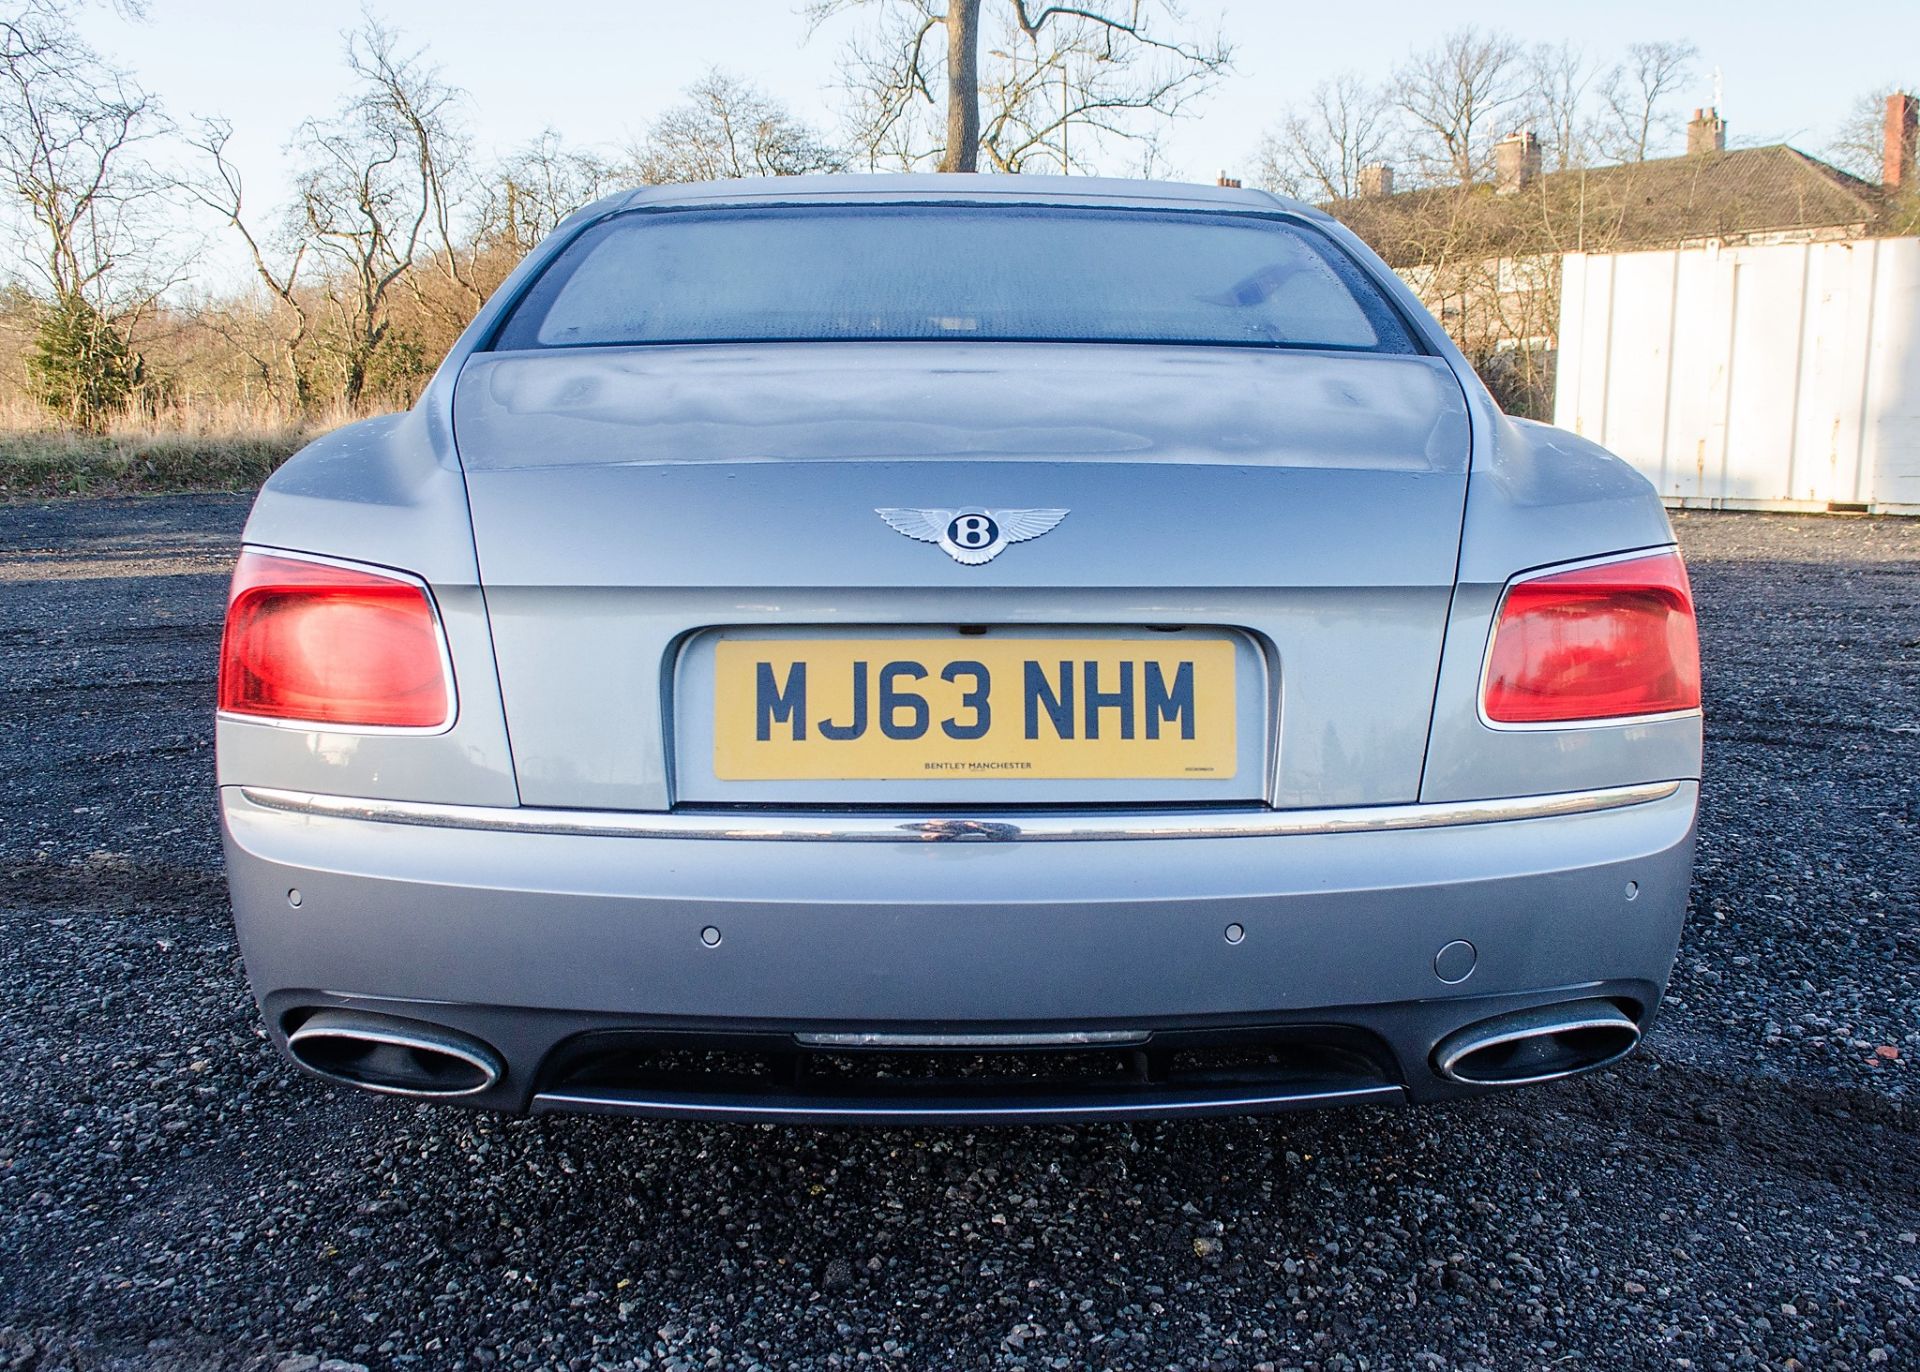 Bentley Flying Spur 6.0 W12 automatic 4 door saloon car Registration Number: MJ63 NHM Date of - Image 7 of 51